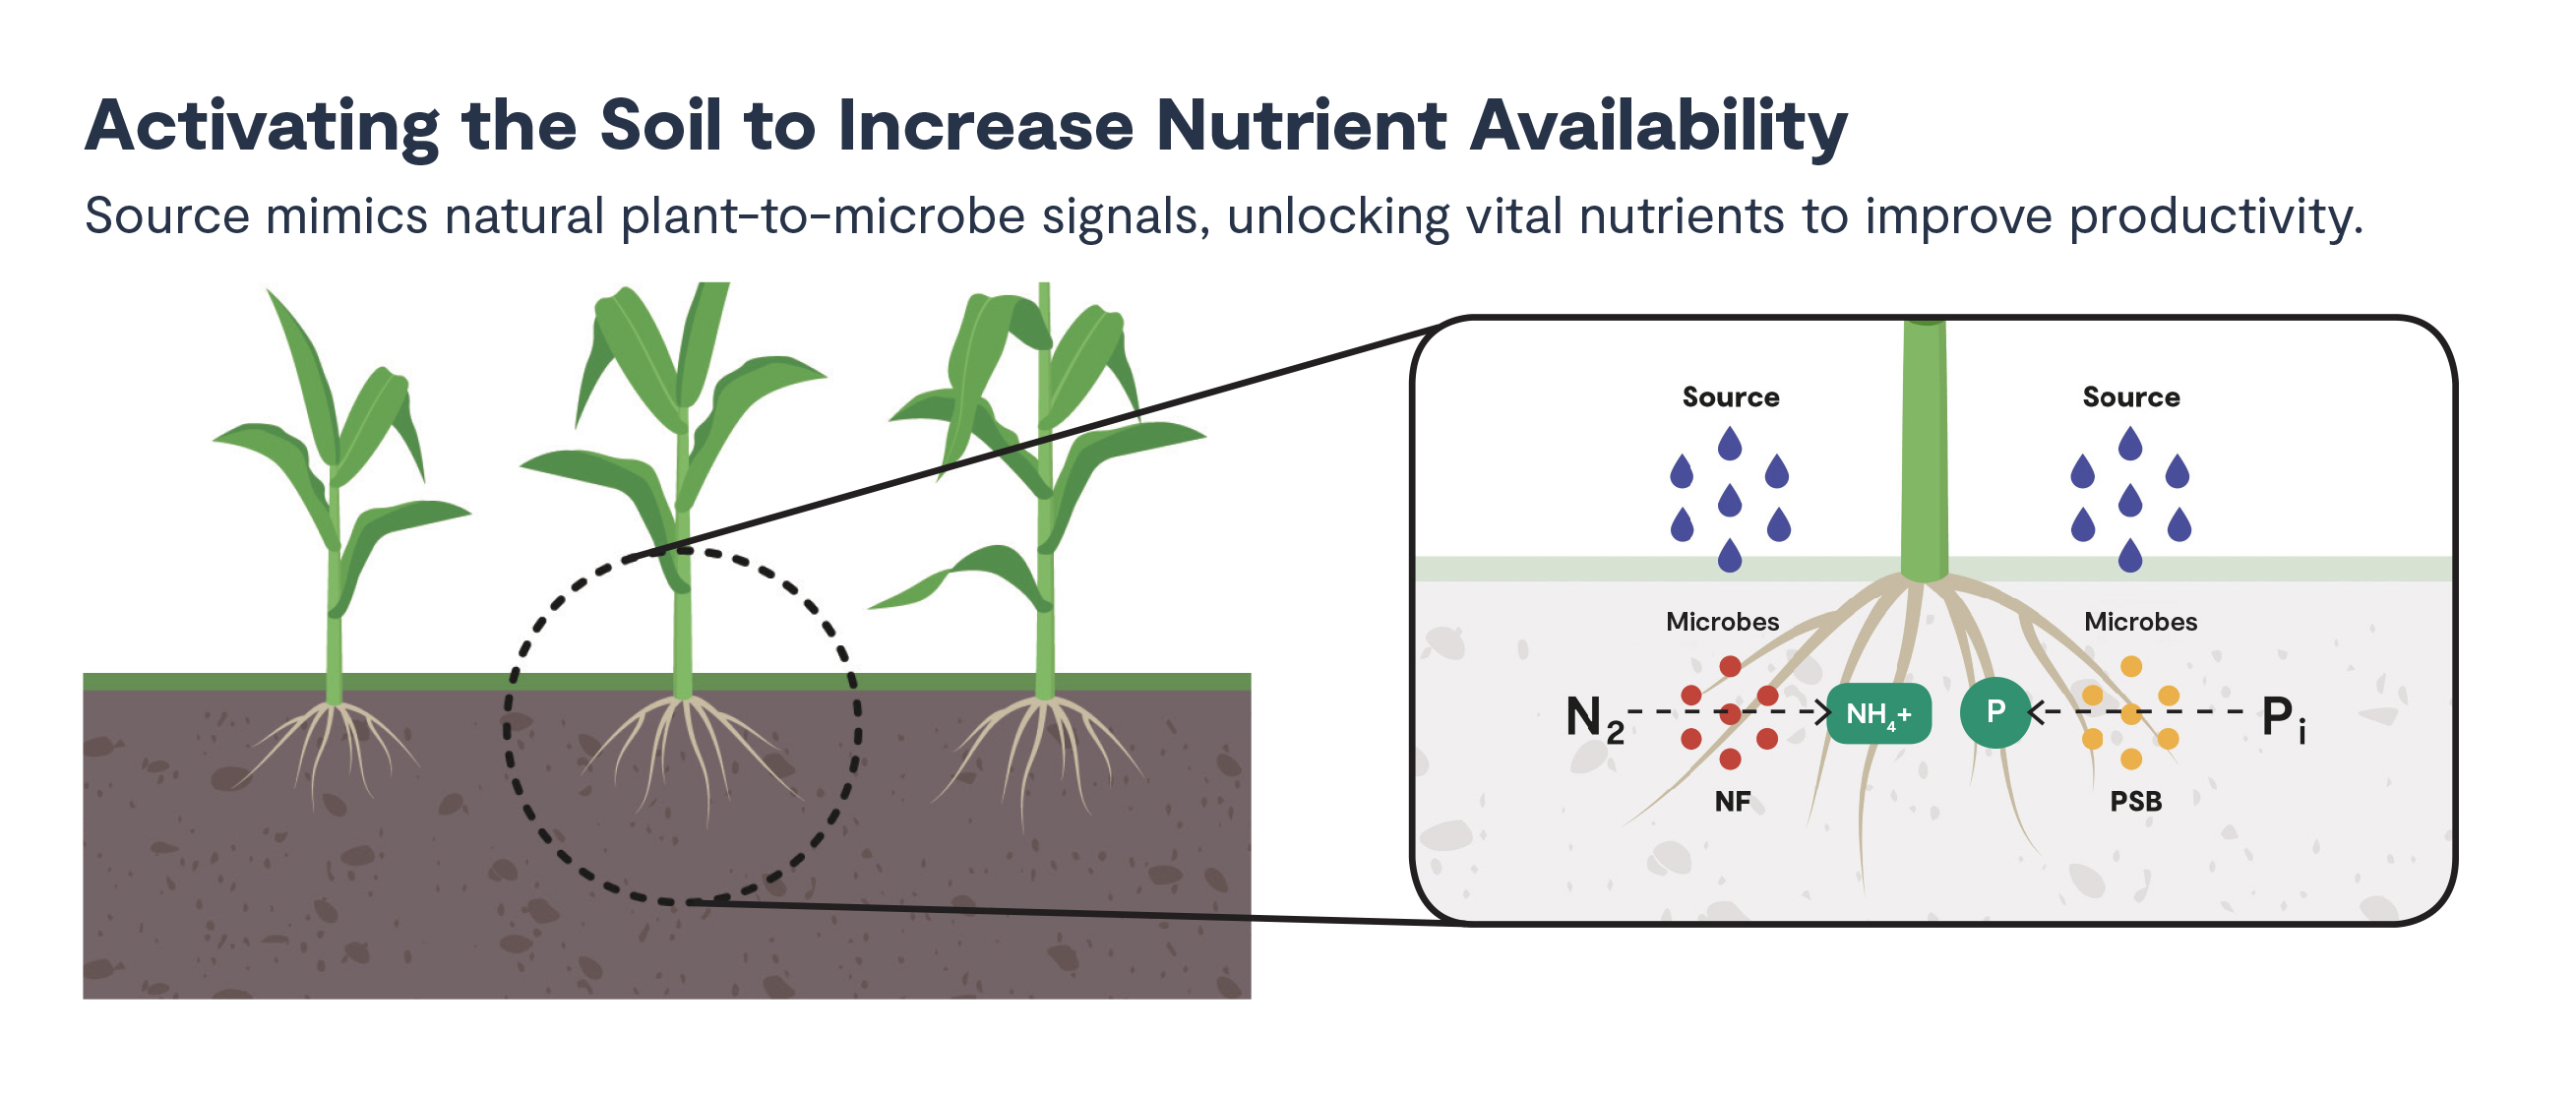 Source(tm) helps growers maximize crop performance by activating nutrients that already exist in the field.